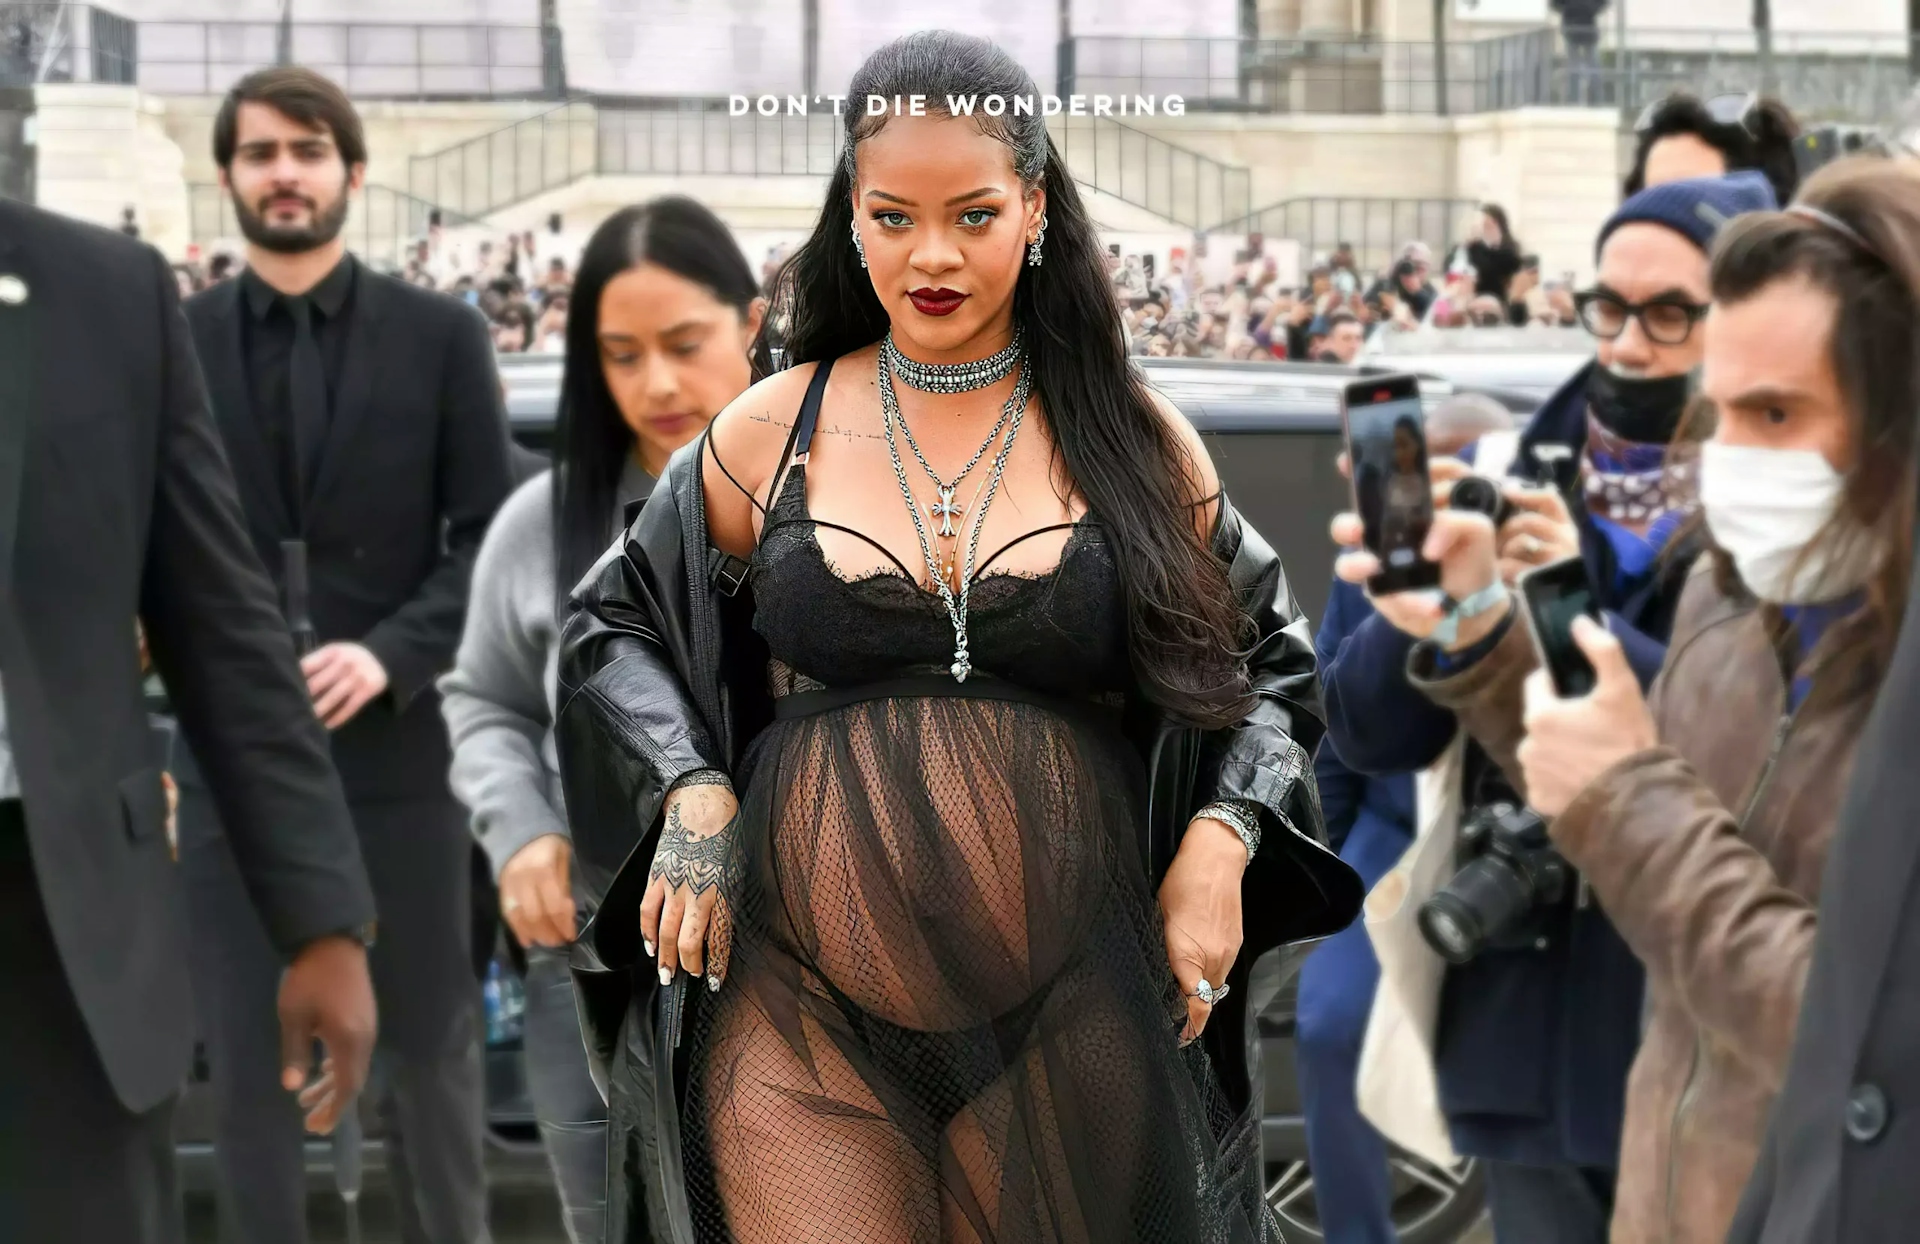 The Best Maternity Look Ever? Rihanna Wears A Sheer Black Dress To The Dior Paris Fashion Week Show